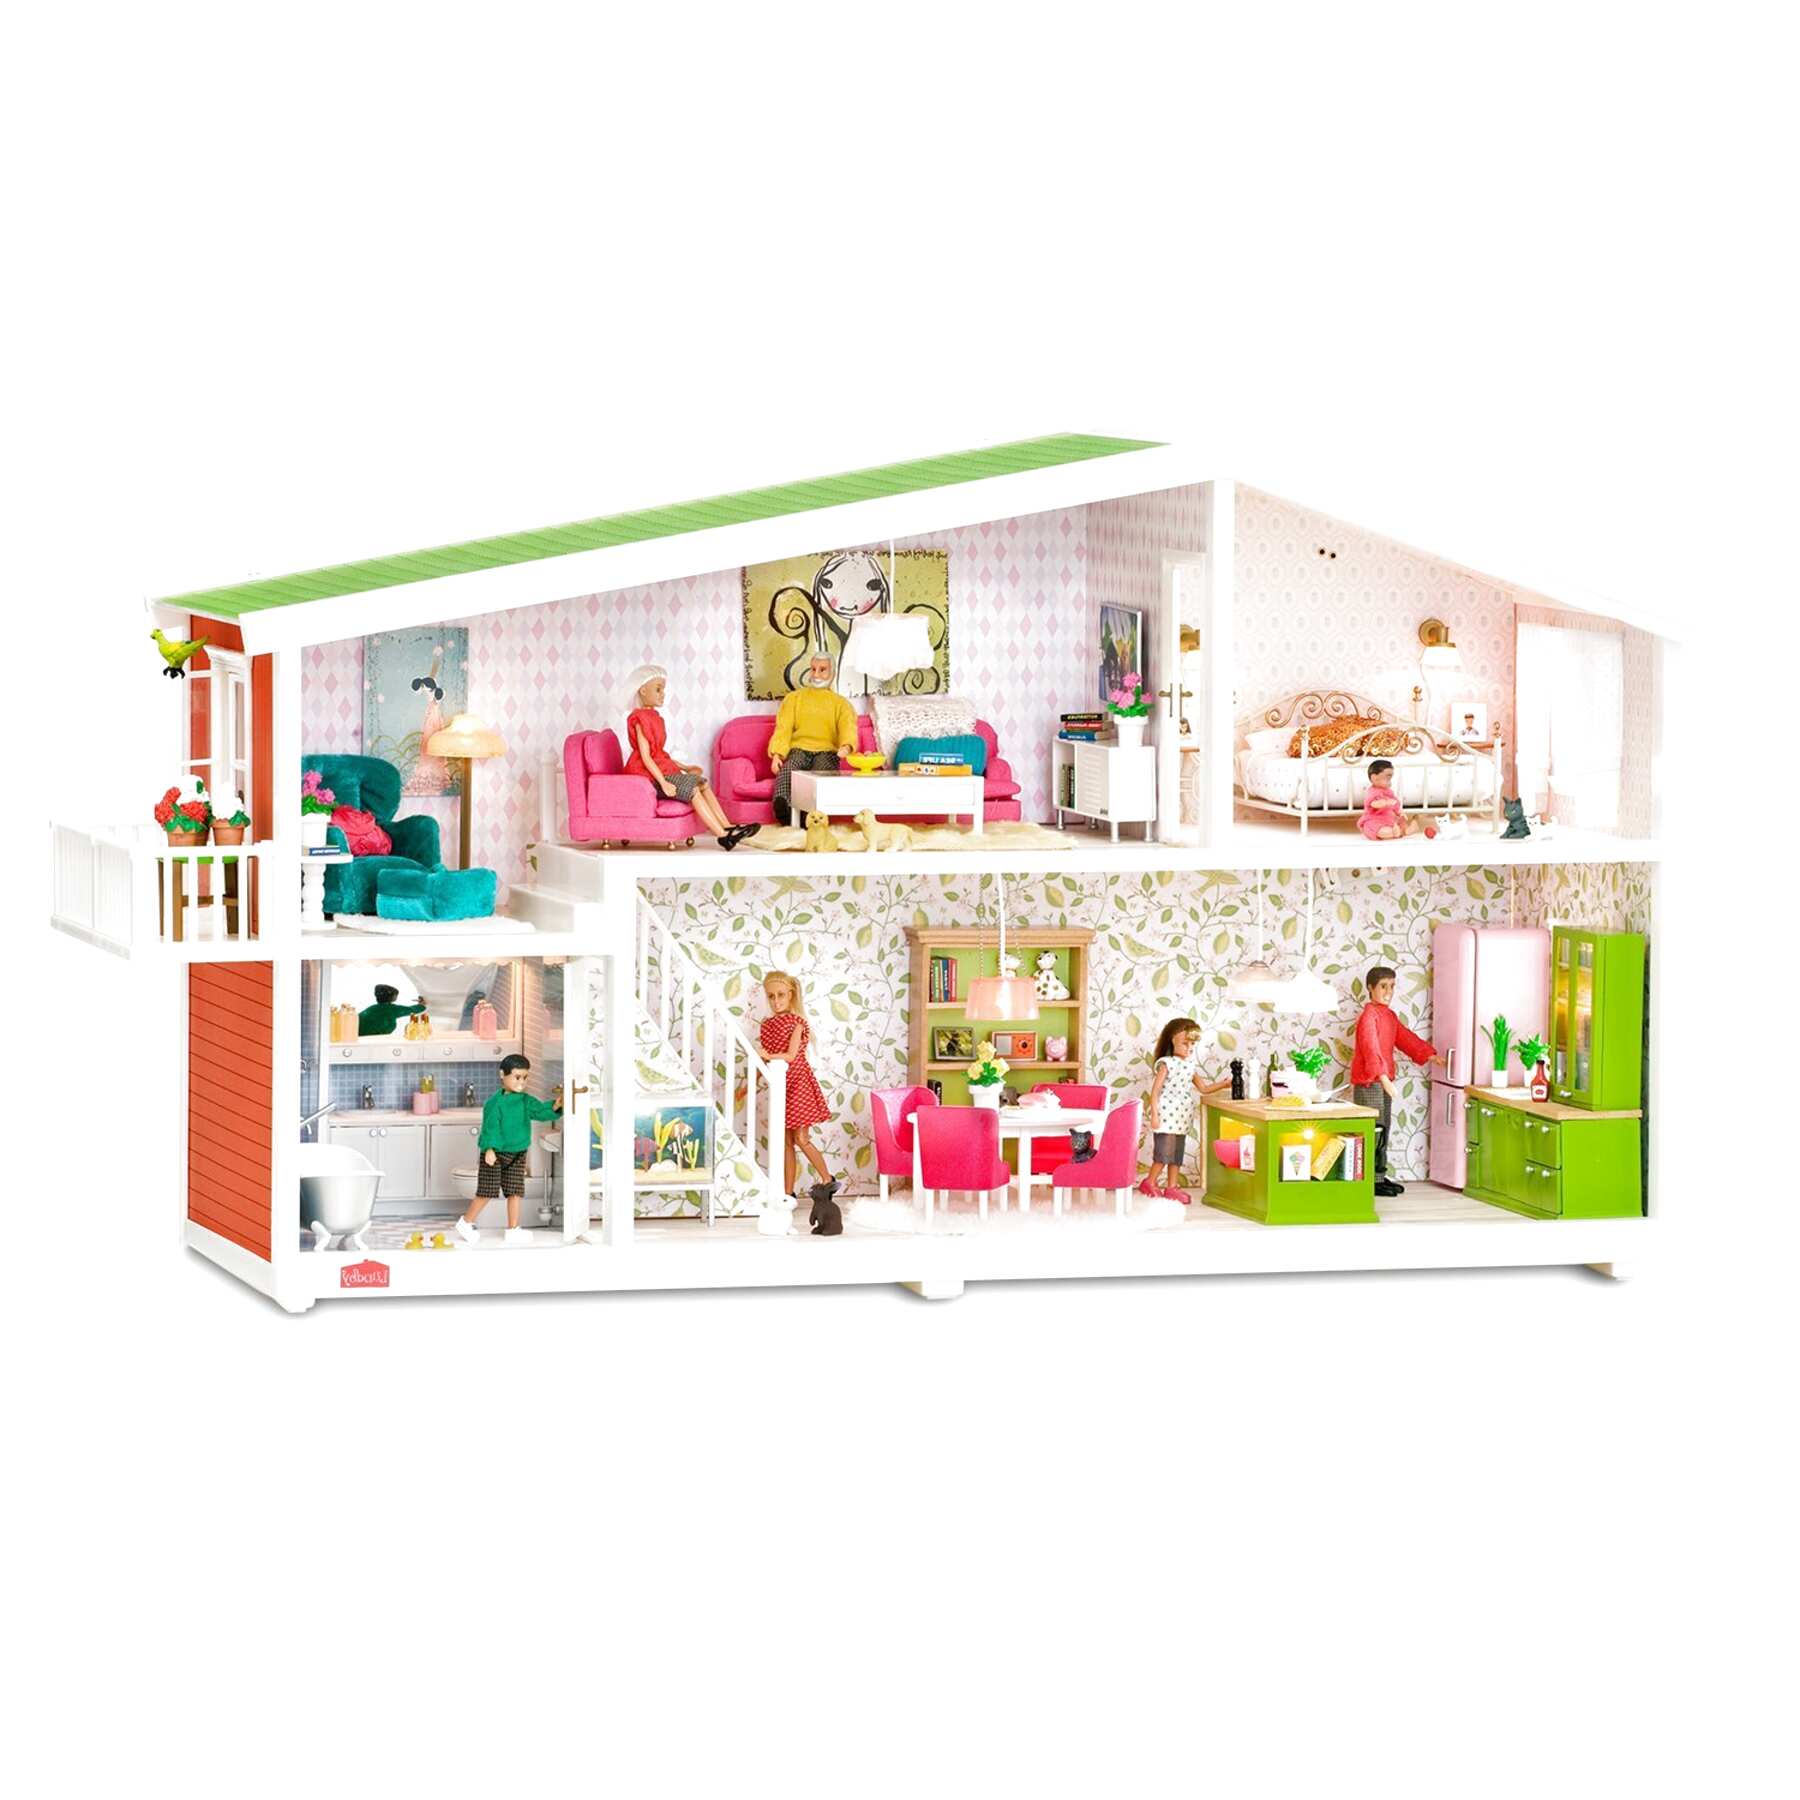  00 Doll Family Playset Lundby   8063   60  